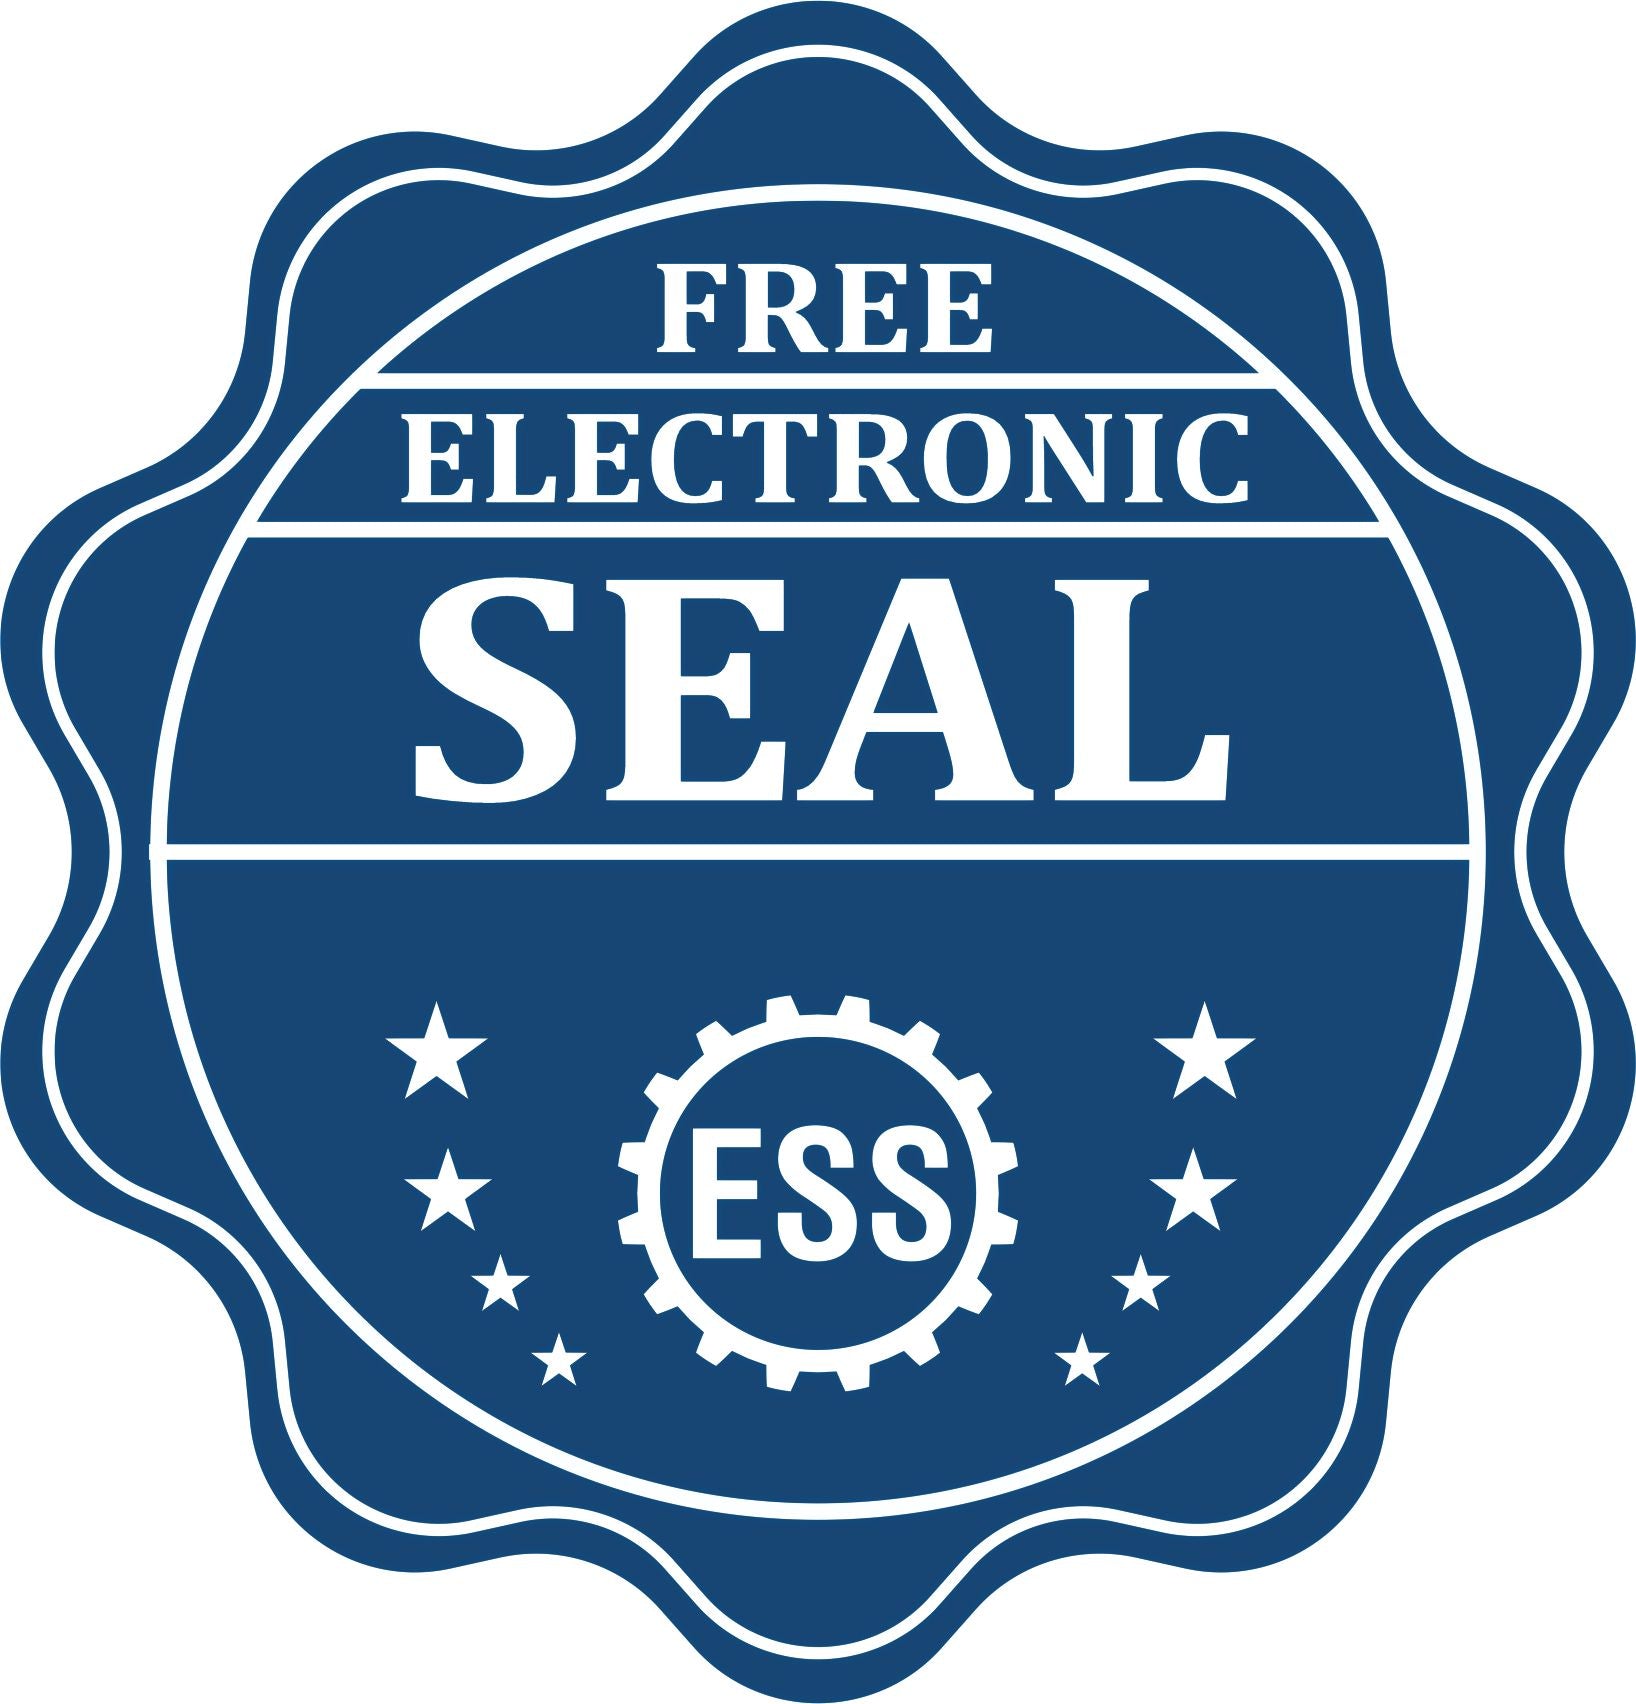 A badge showing a free electronic seal for the State of Michigan Extended Long Reach Engineer Seal with stars and the ESS gear on the emblem.